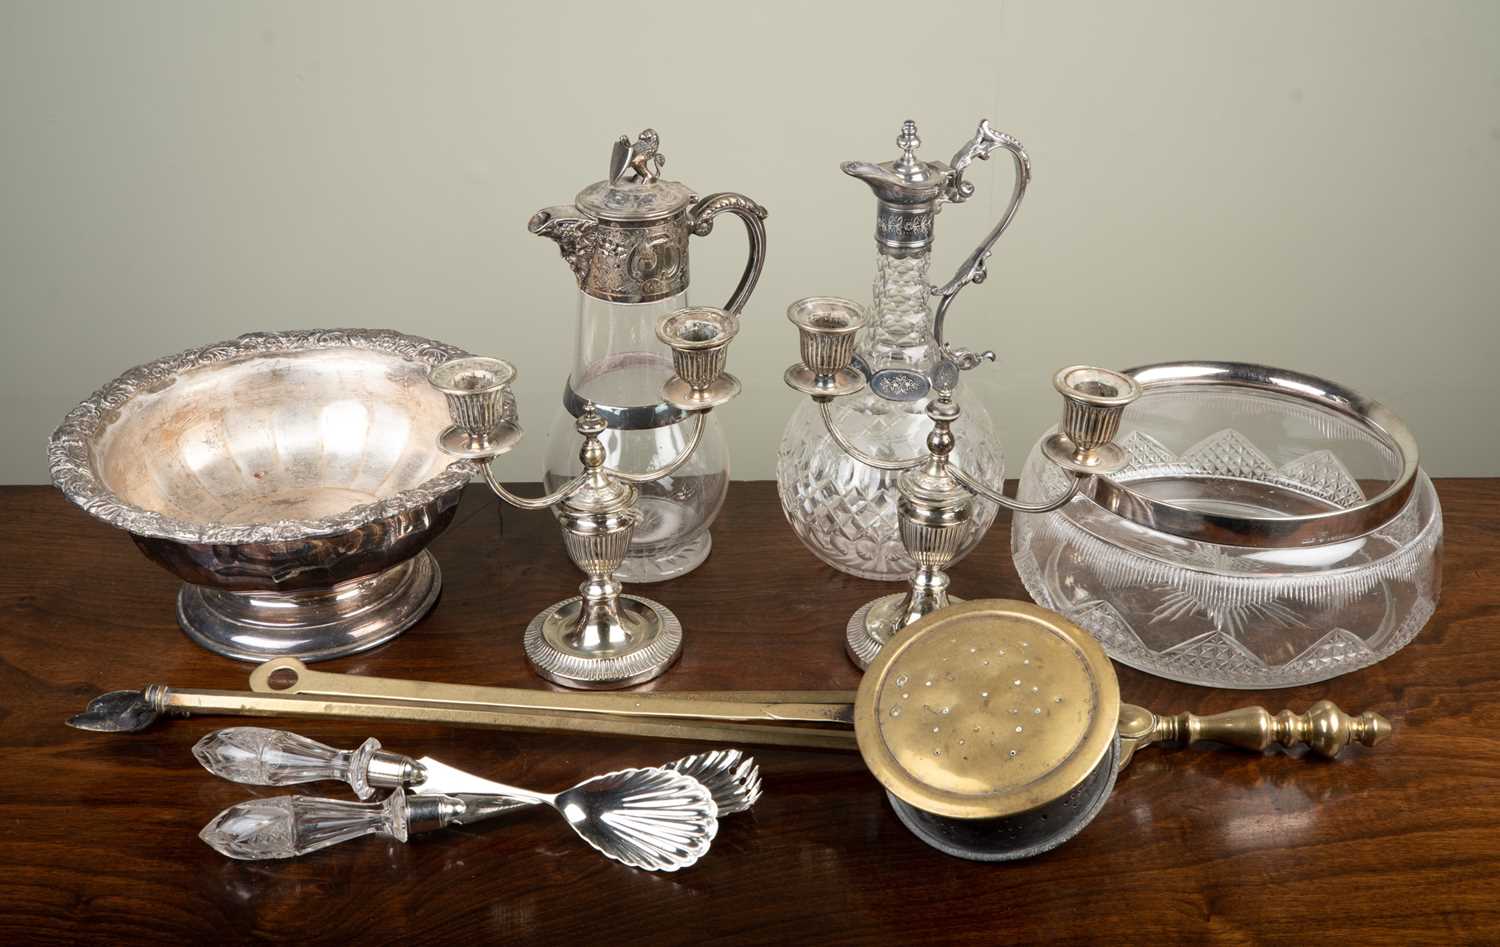 Two silver mounted cut glass claret jugs, a pair of two branch silver plated candelabras, a pair